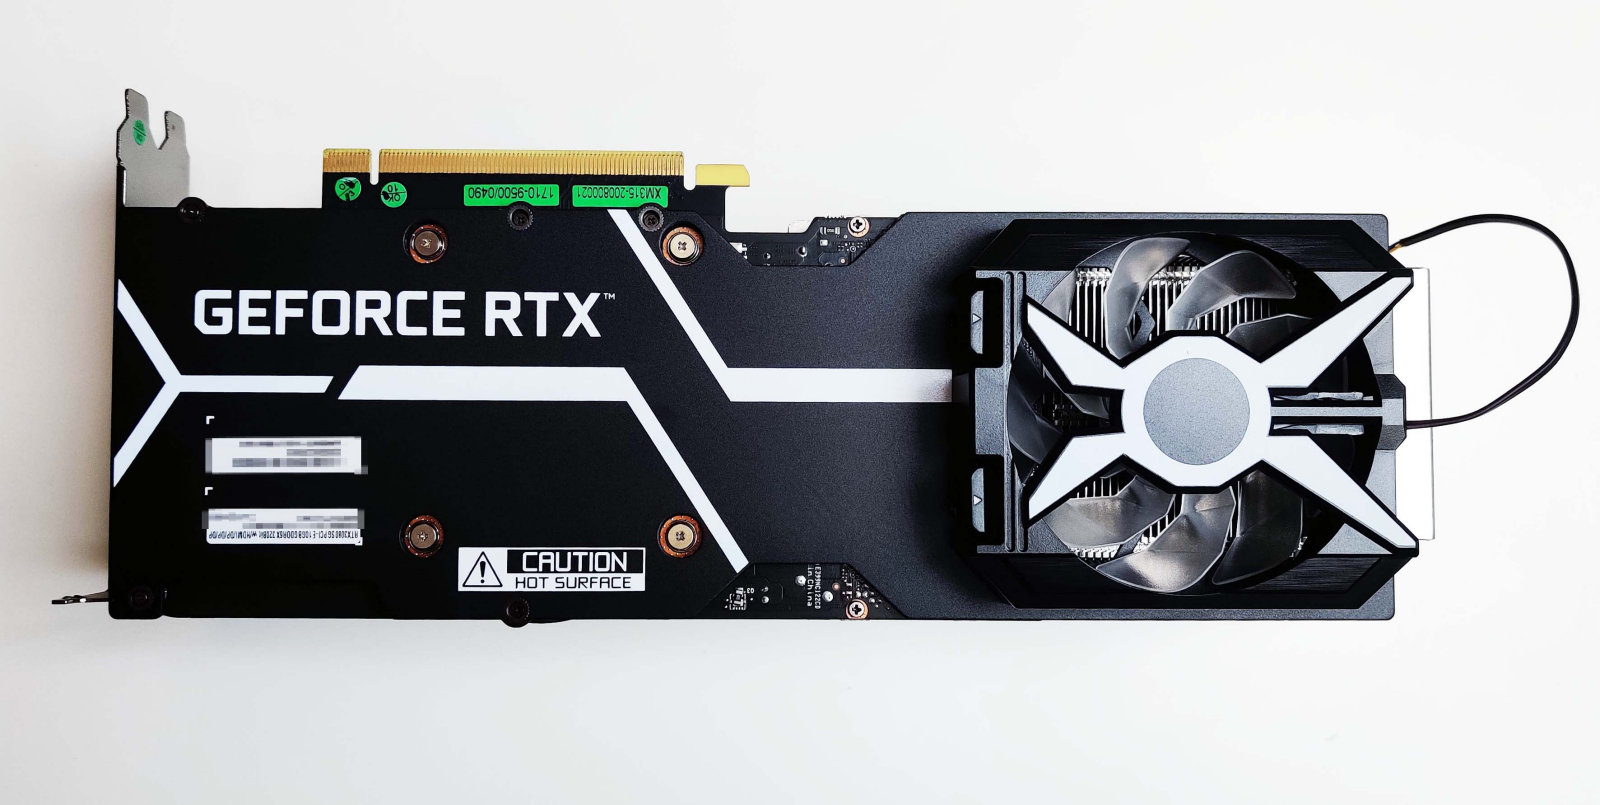 GALAX GeForce RTX 4080 SG Review - The Quad Cooler Returns!